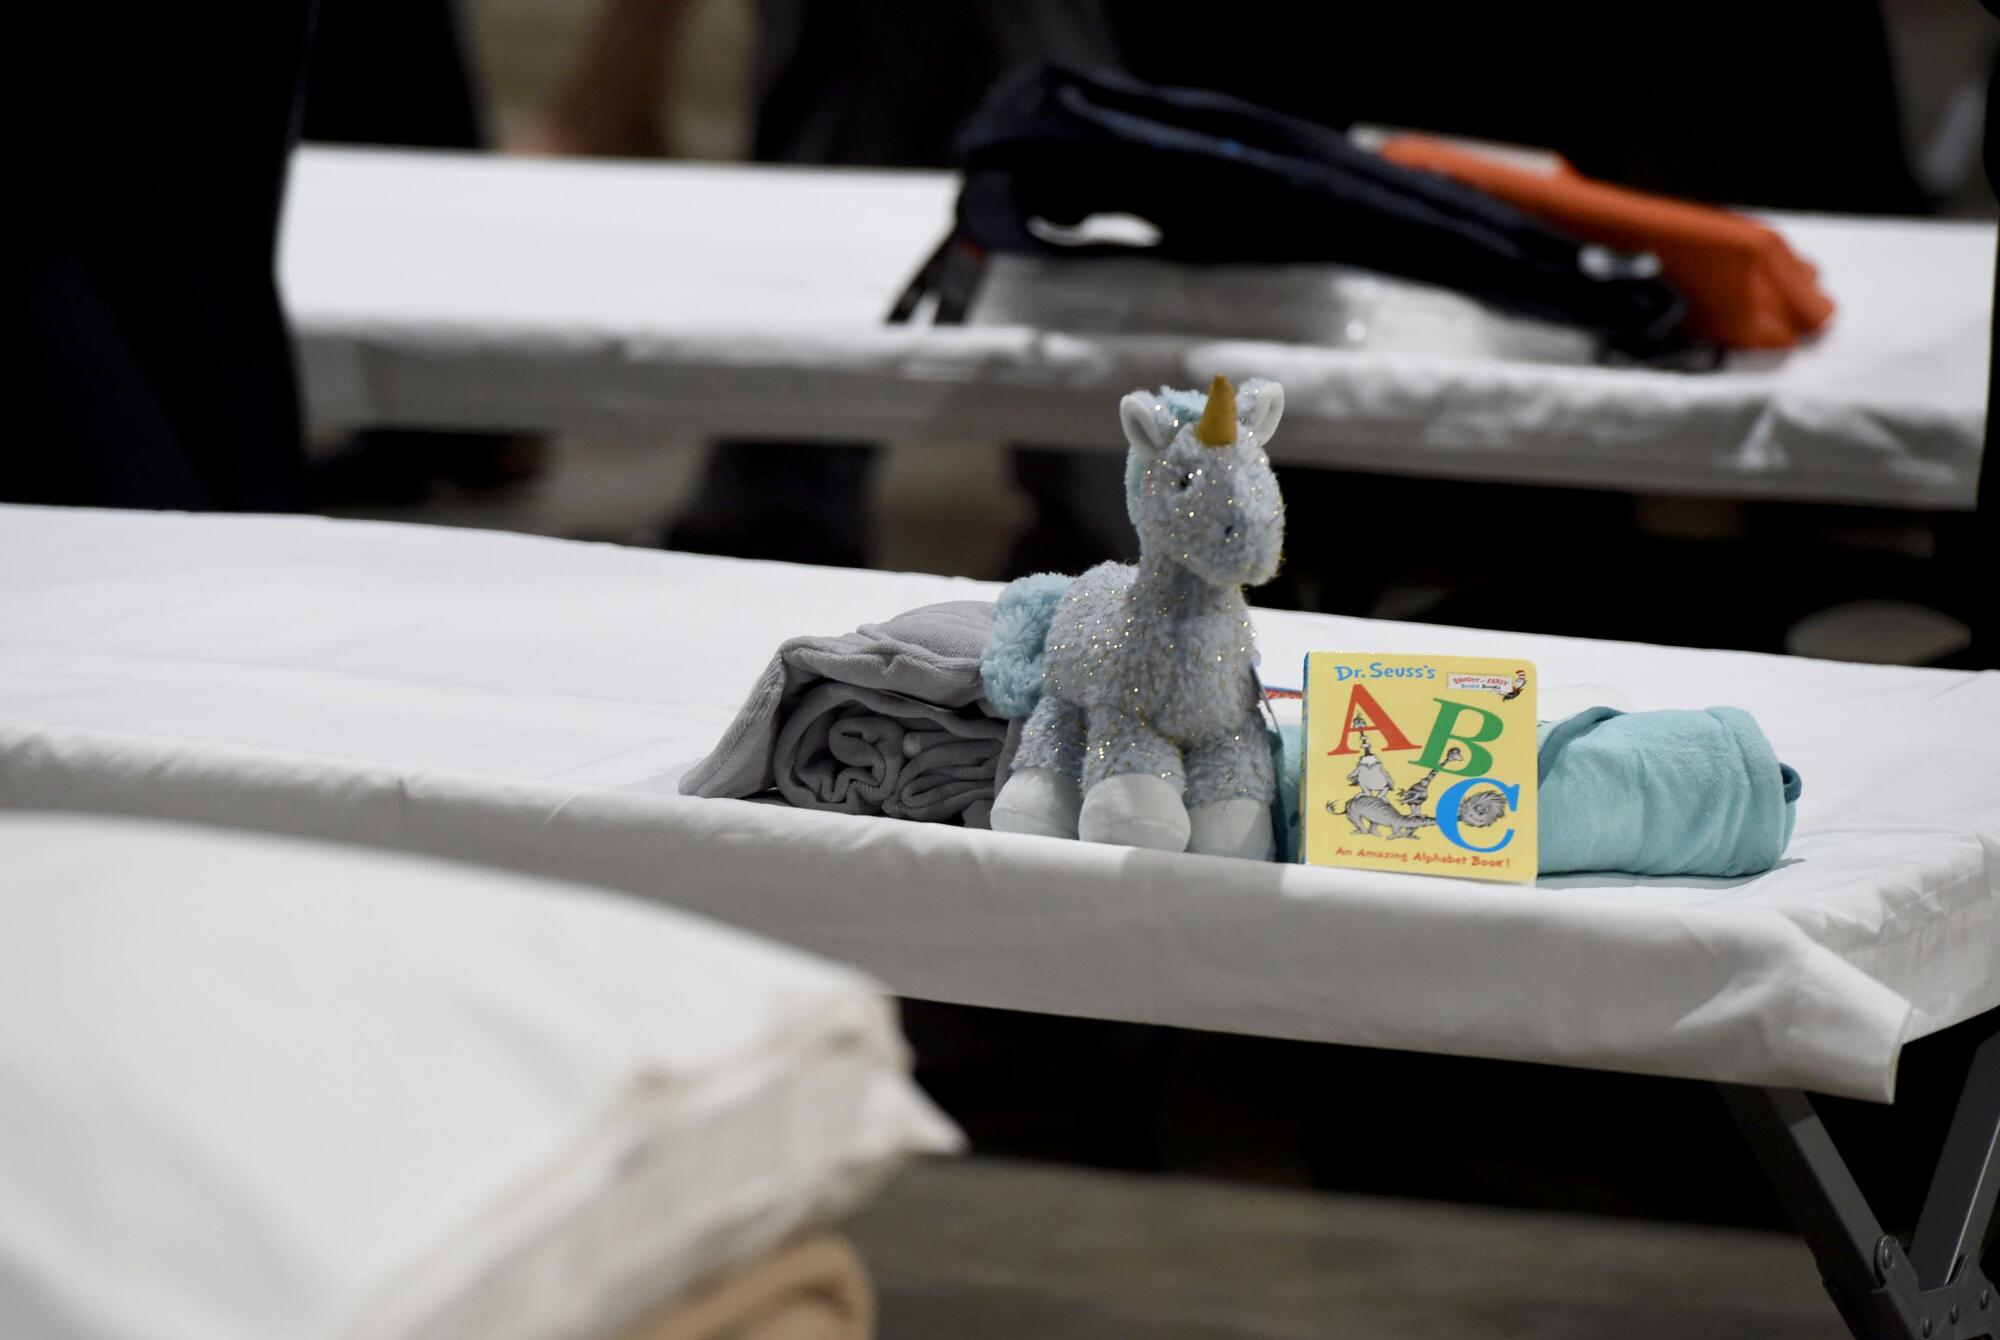 A stuffed unicorn, Dr. Seuss book and blankets sit on top of a white cot